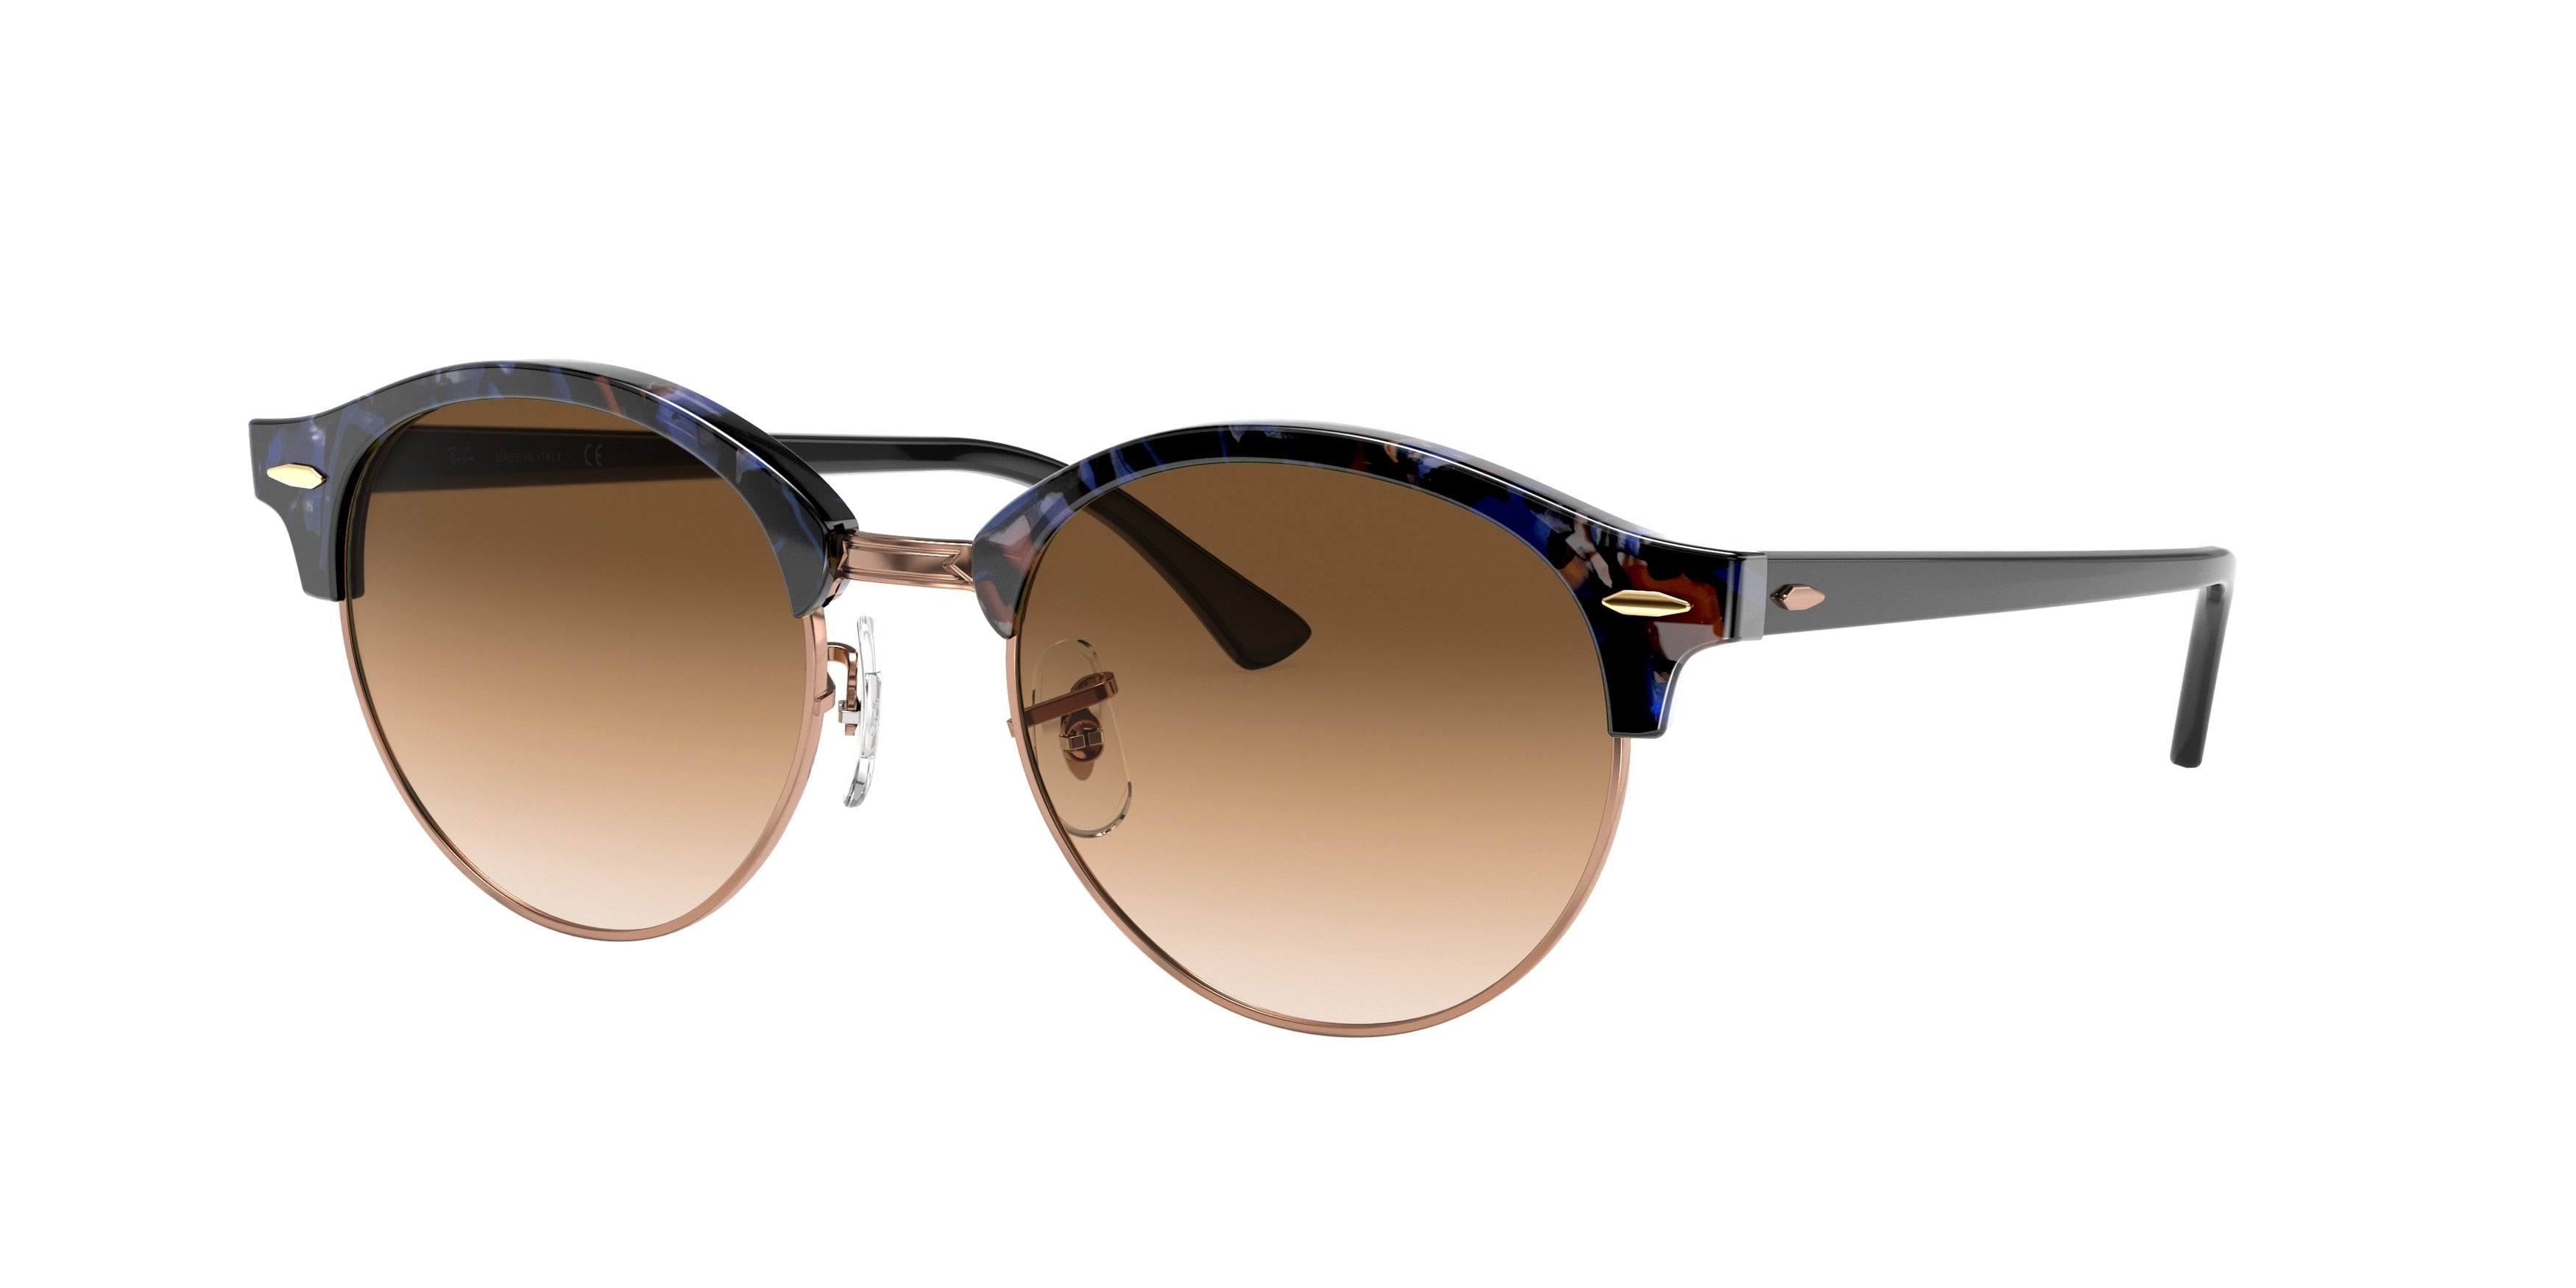 Ray-Ban CLUBROUND RB4246 Round Sunglasses  125651-Brown & Blue 51-145-19 - Color Map Brown